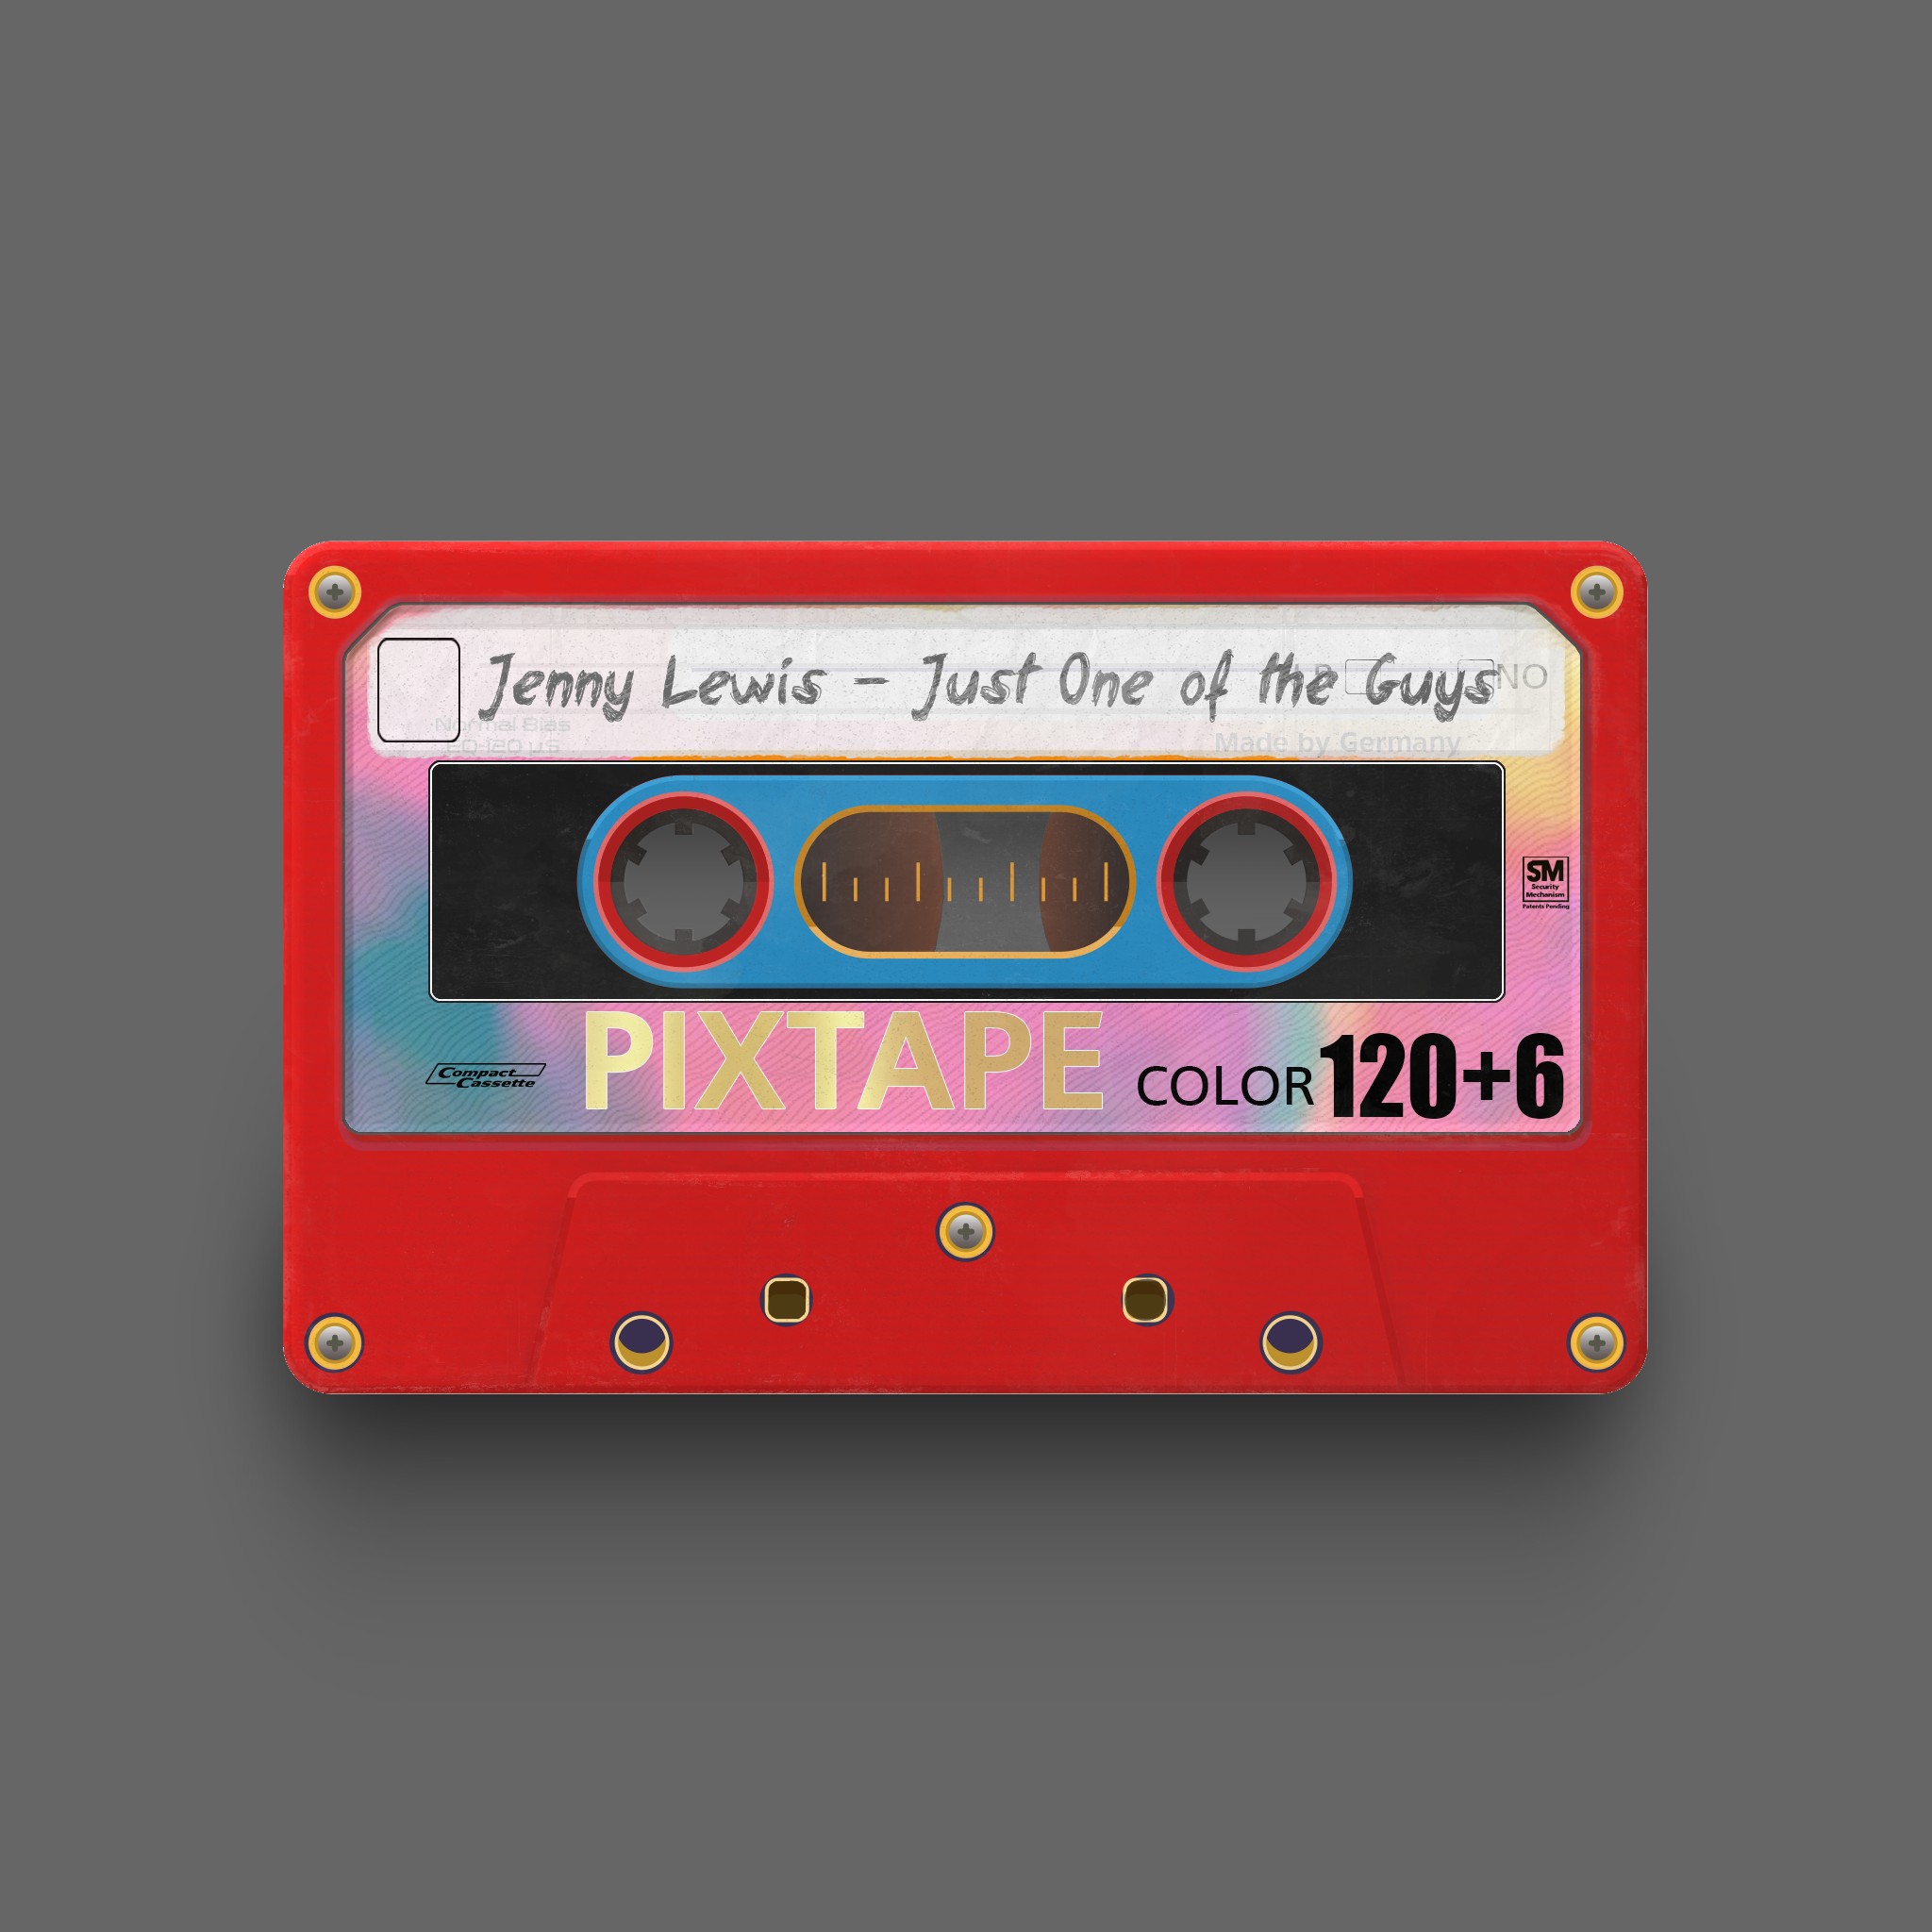 PixTape #9970 | Jenny Lewis - Just One of the Guys